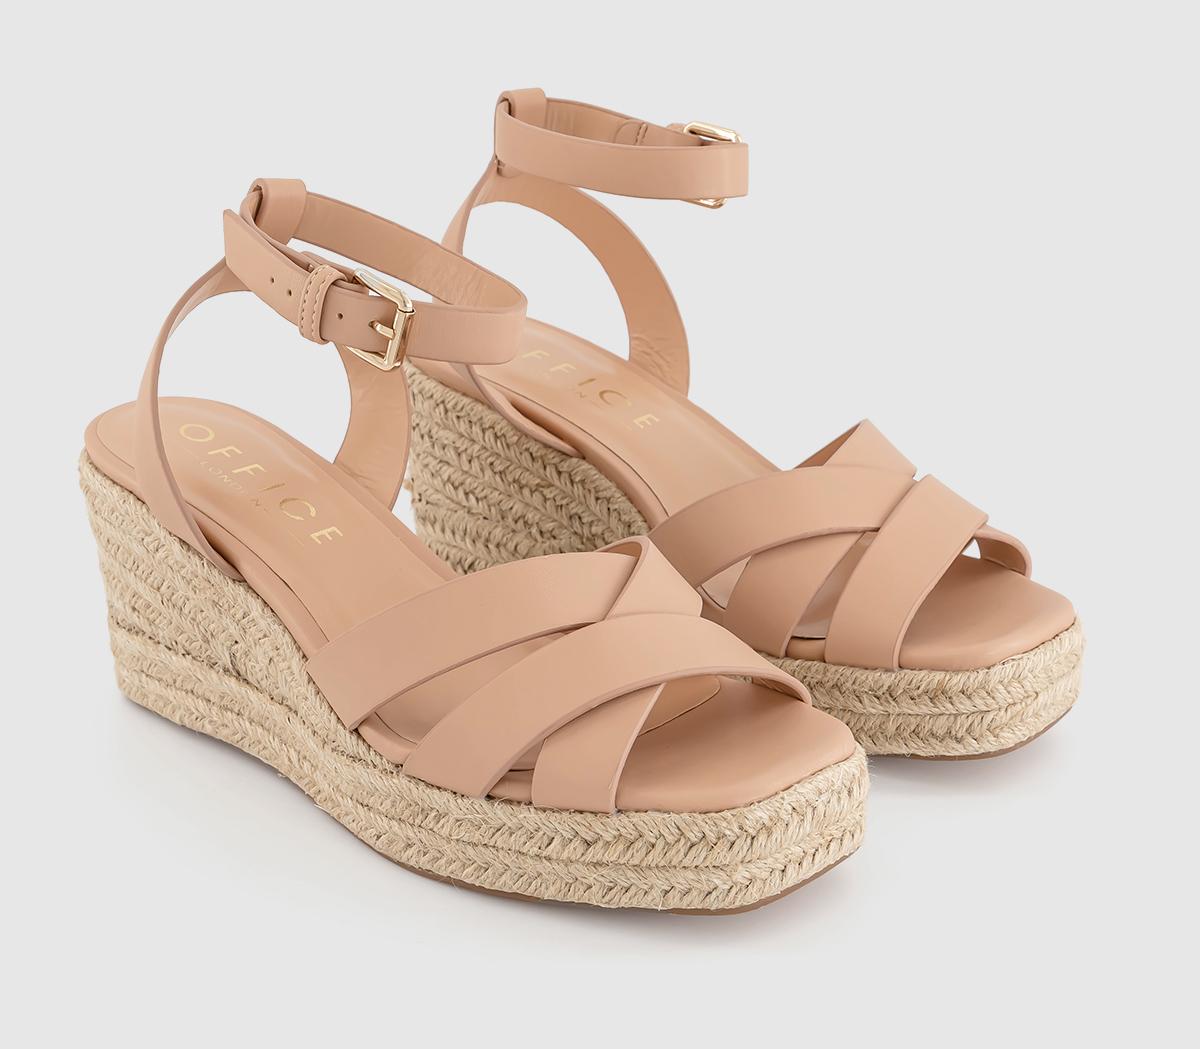 OFFICE Womens Martina Multi Strap Mid Espadrille Wedges Blush Pink, 8